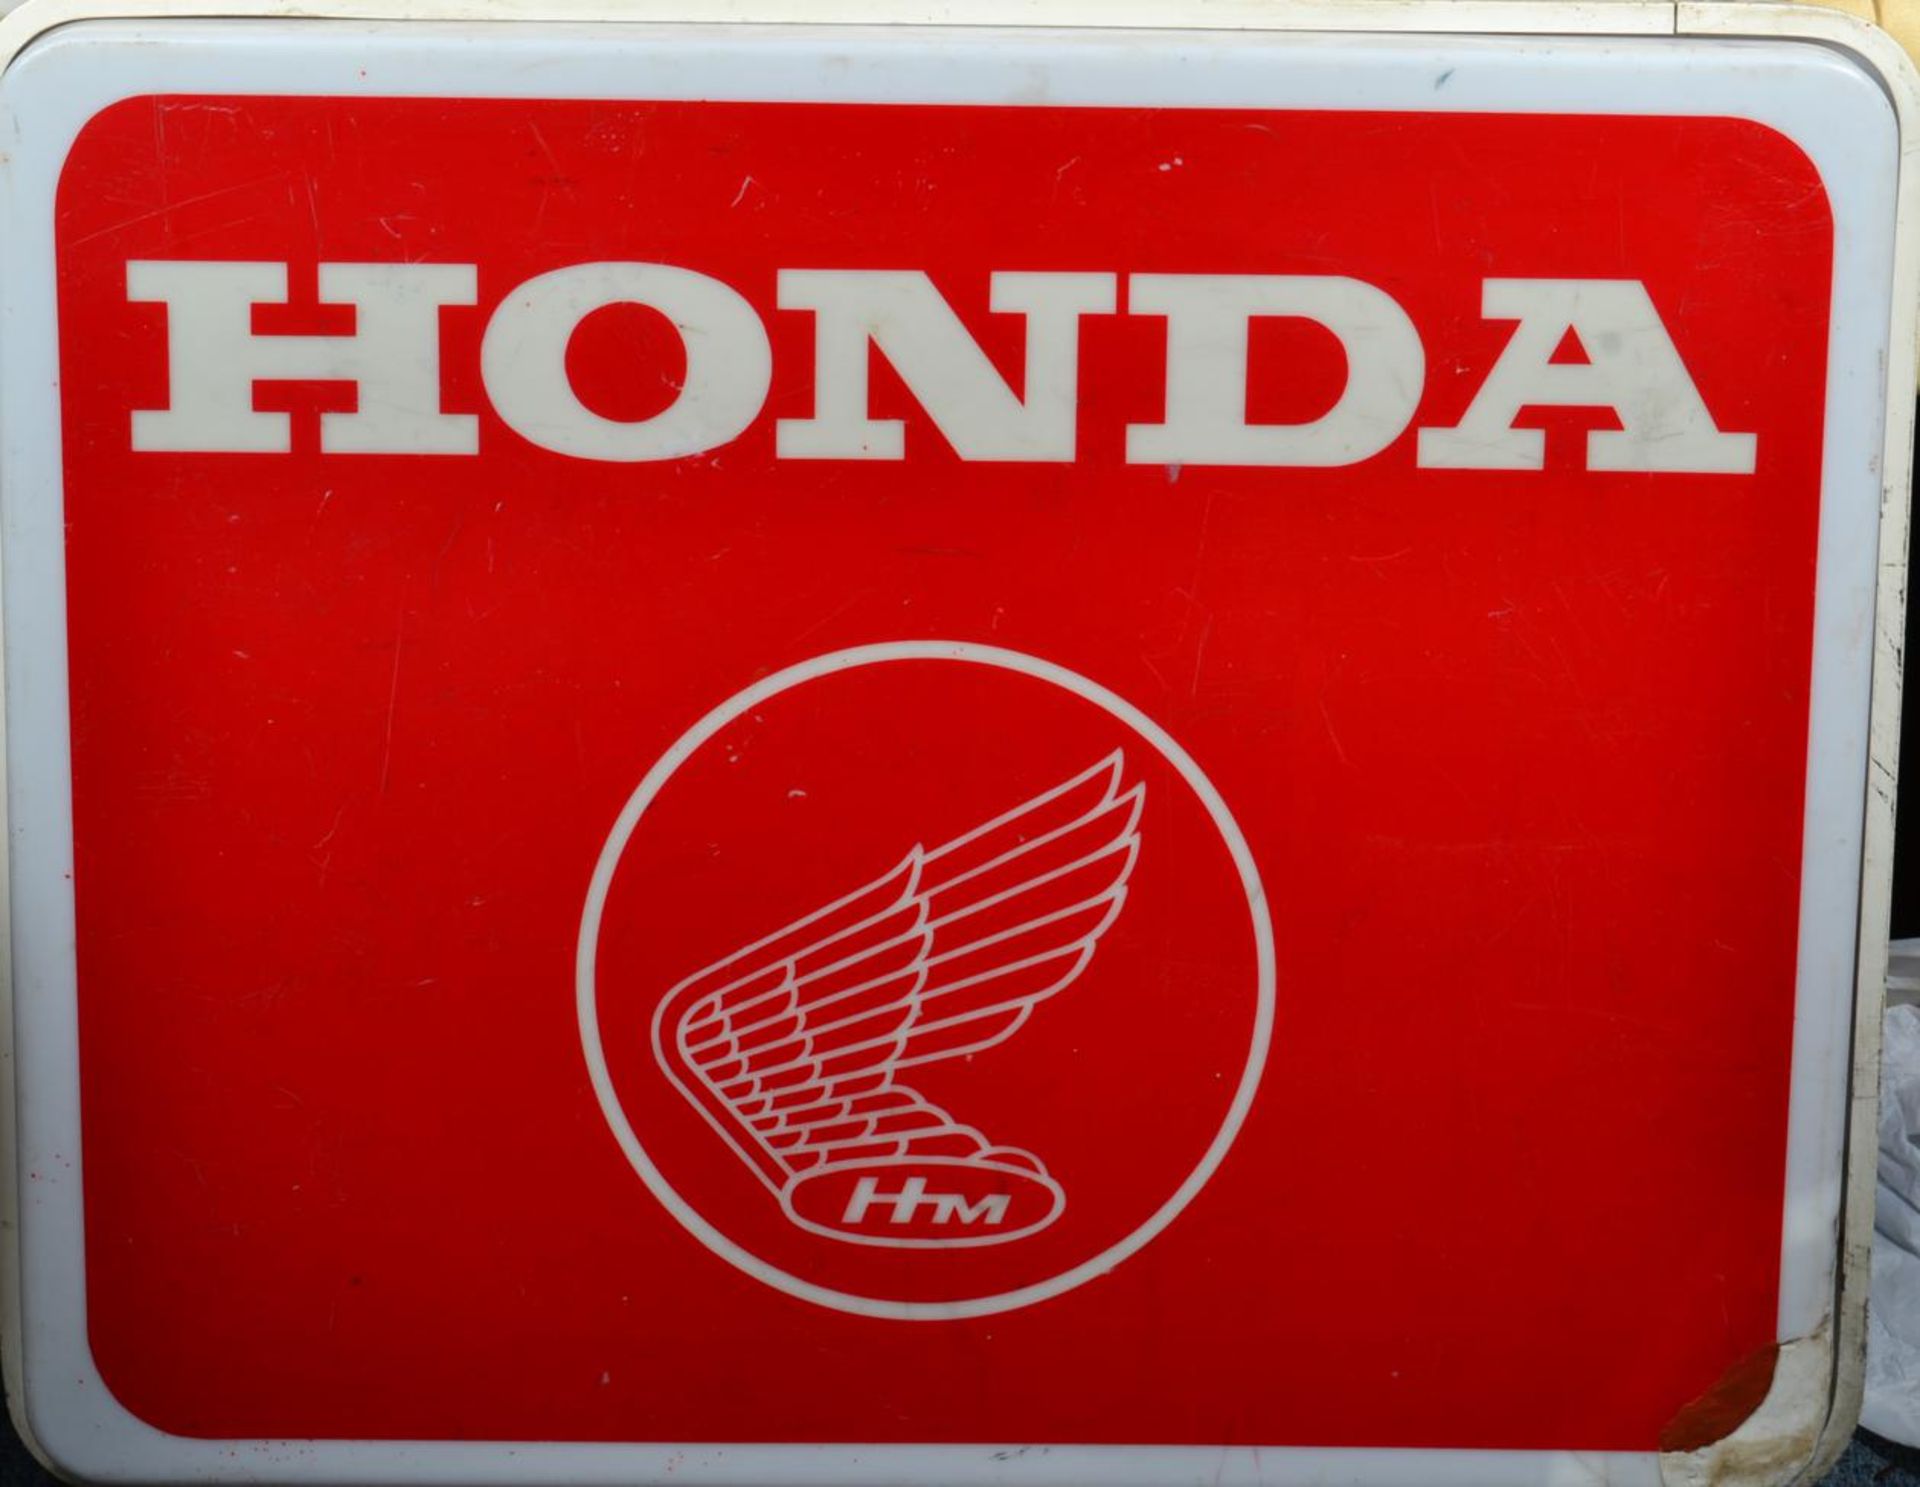 A HONDA Illuminated Perspex Advertising Sign, decorated with a winged emblem and the letters HM,